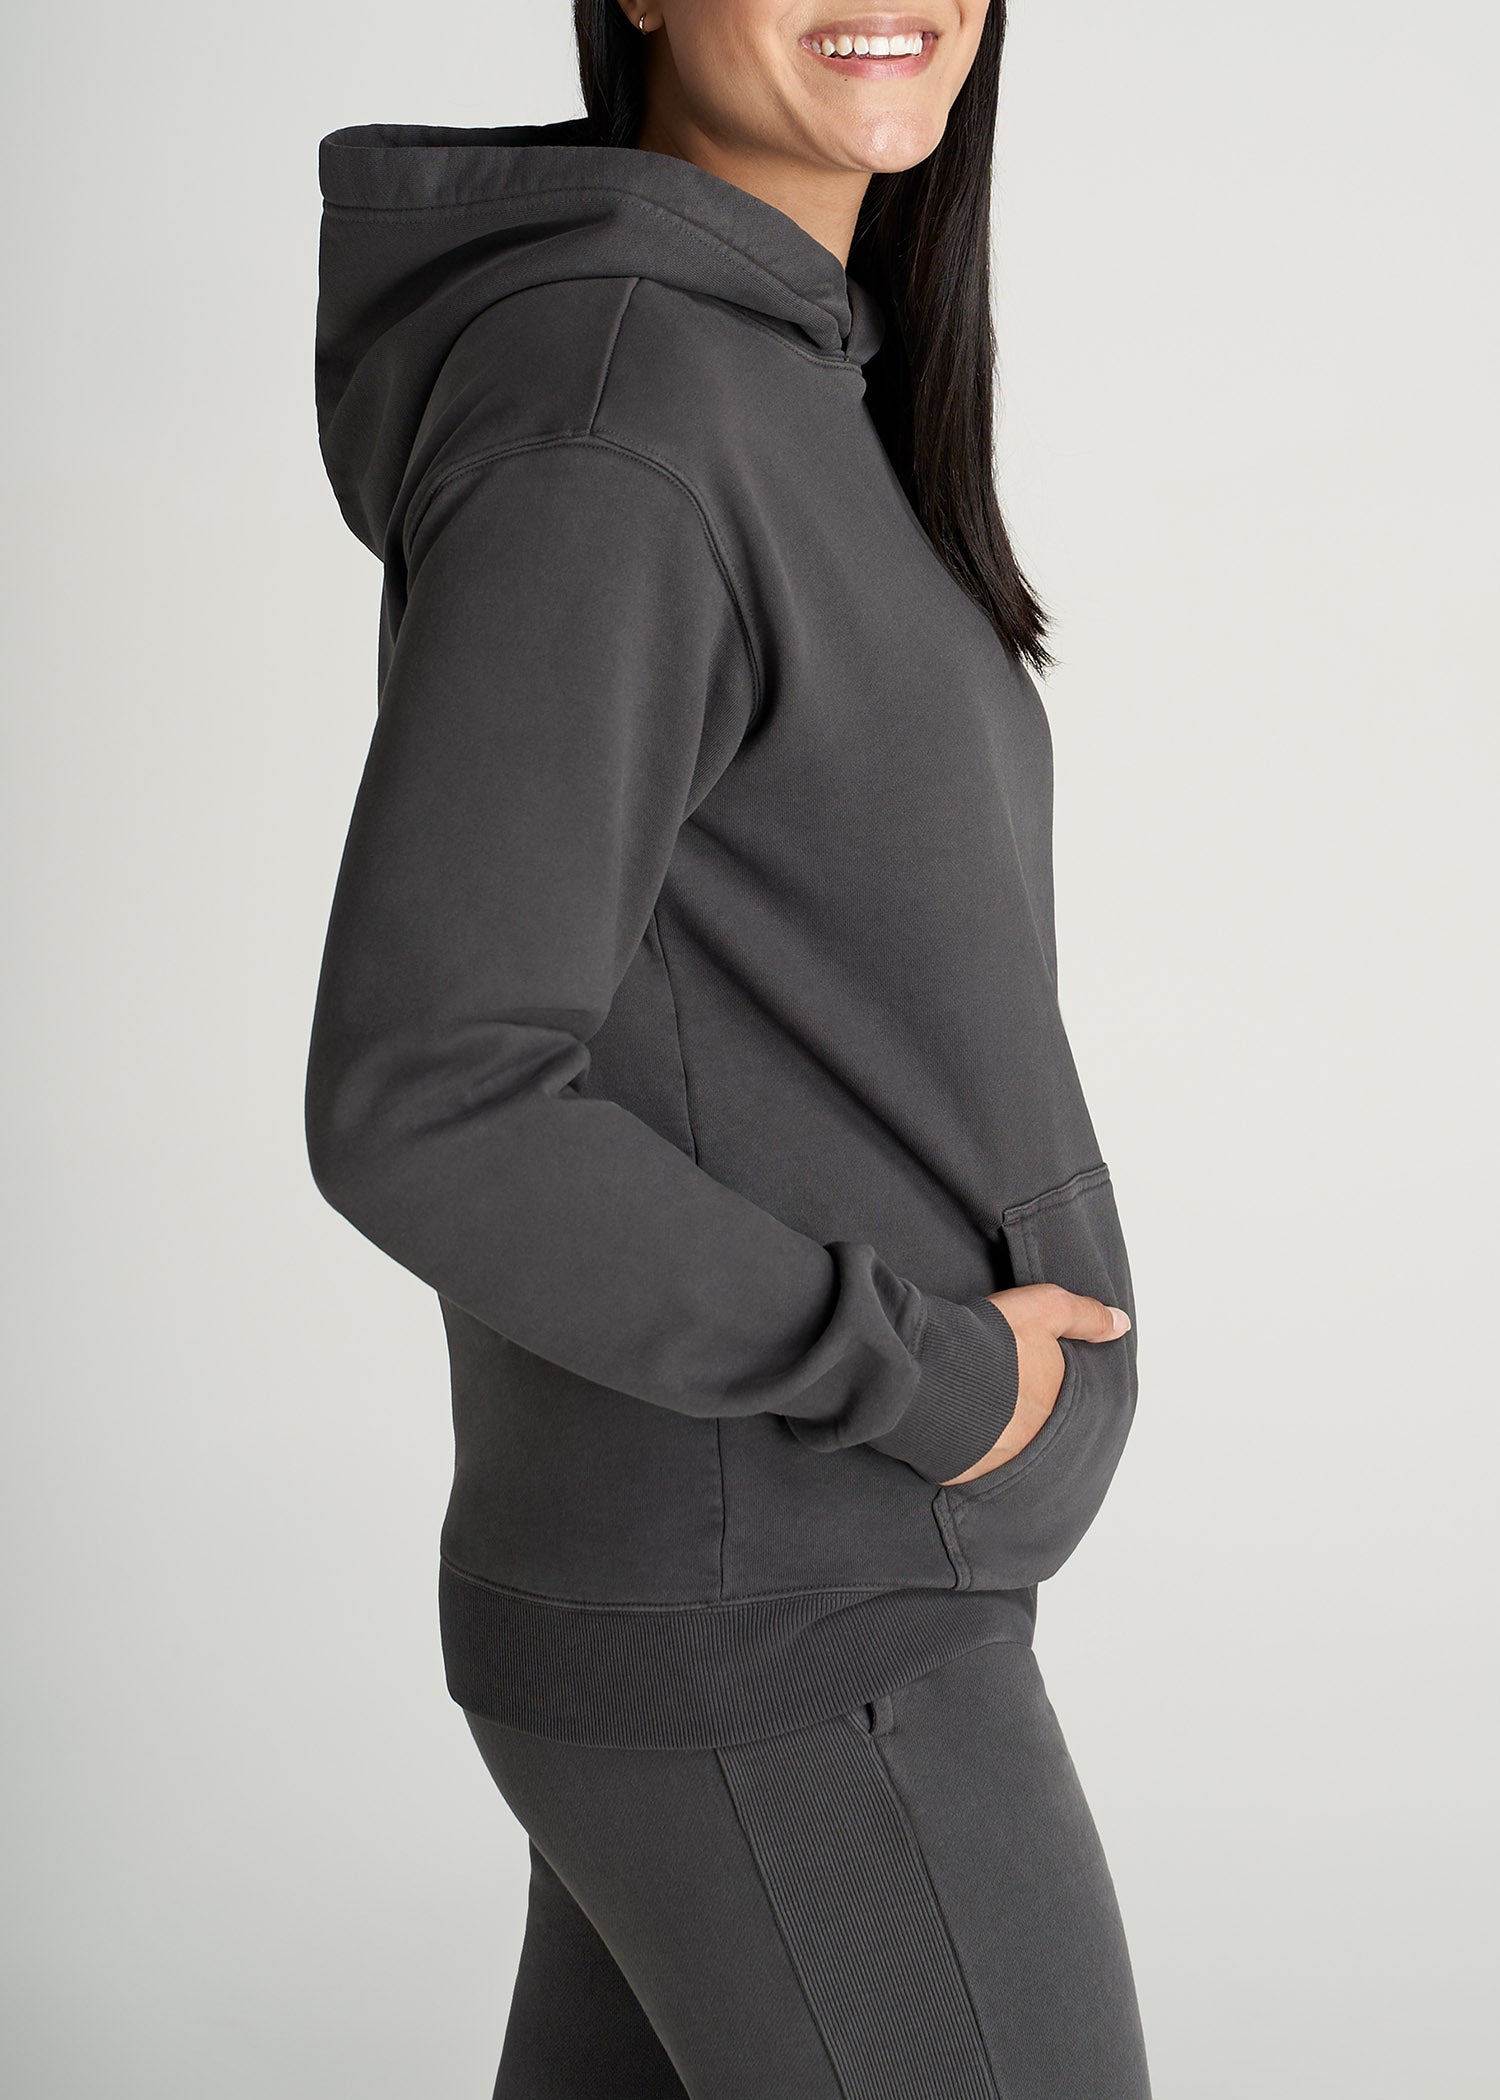 Lululemon Women All Yours Zip Up Hoodie Black Size Large L Great